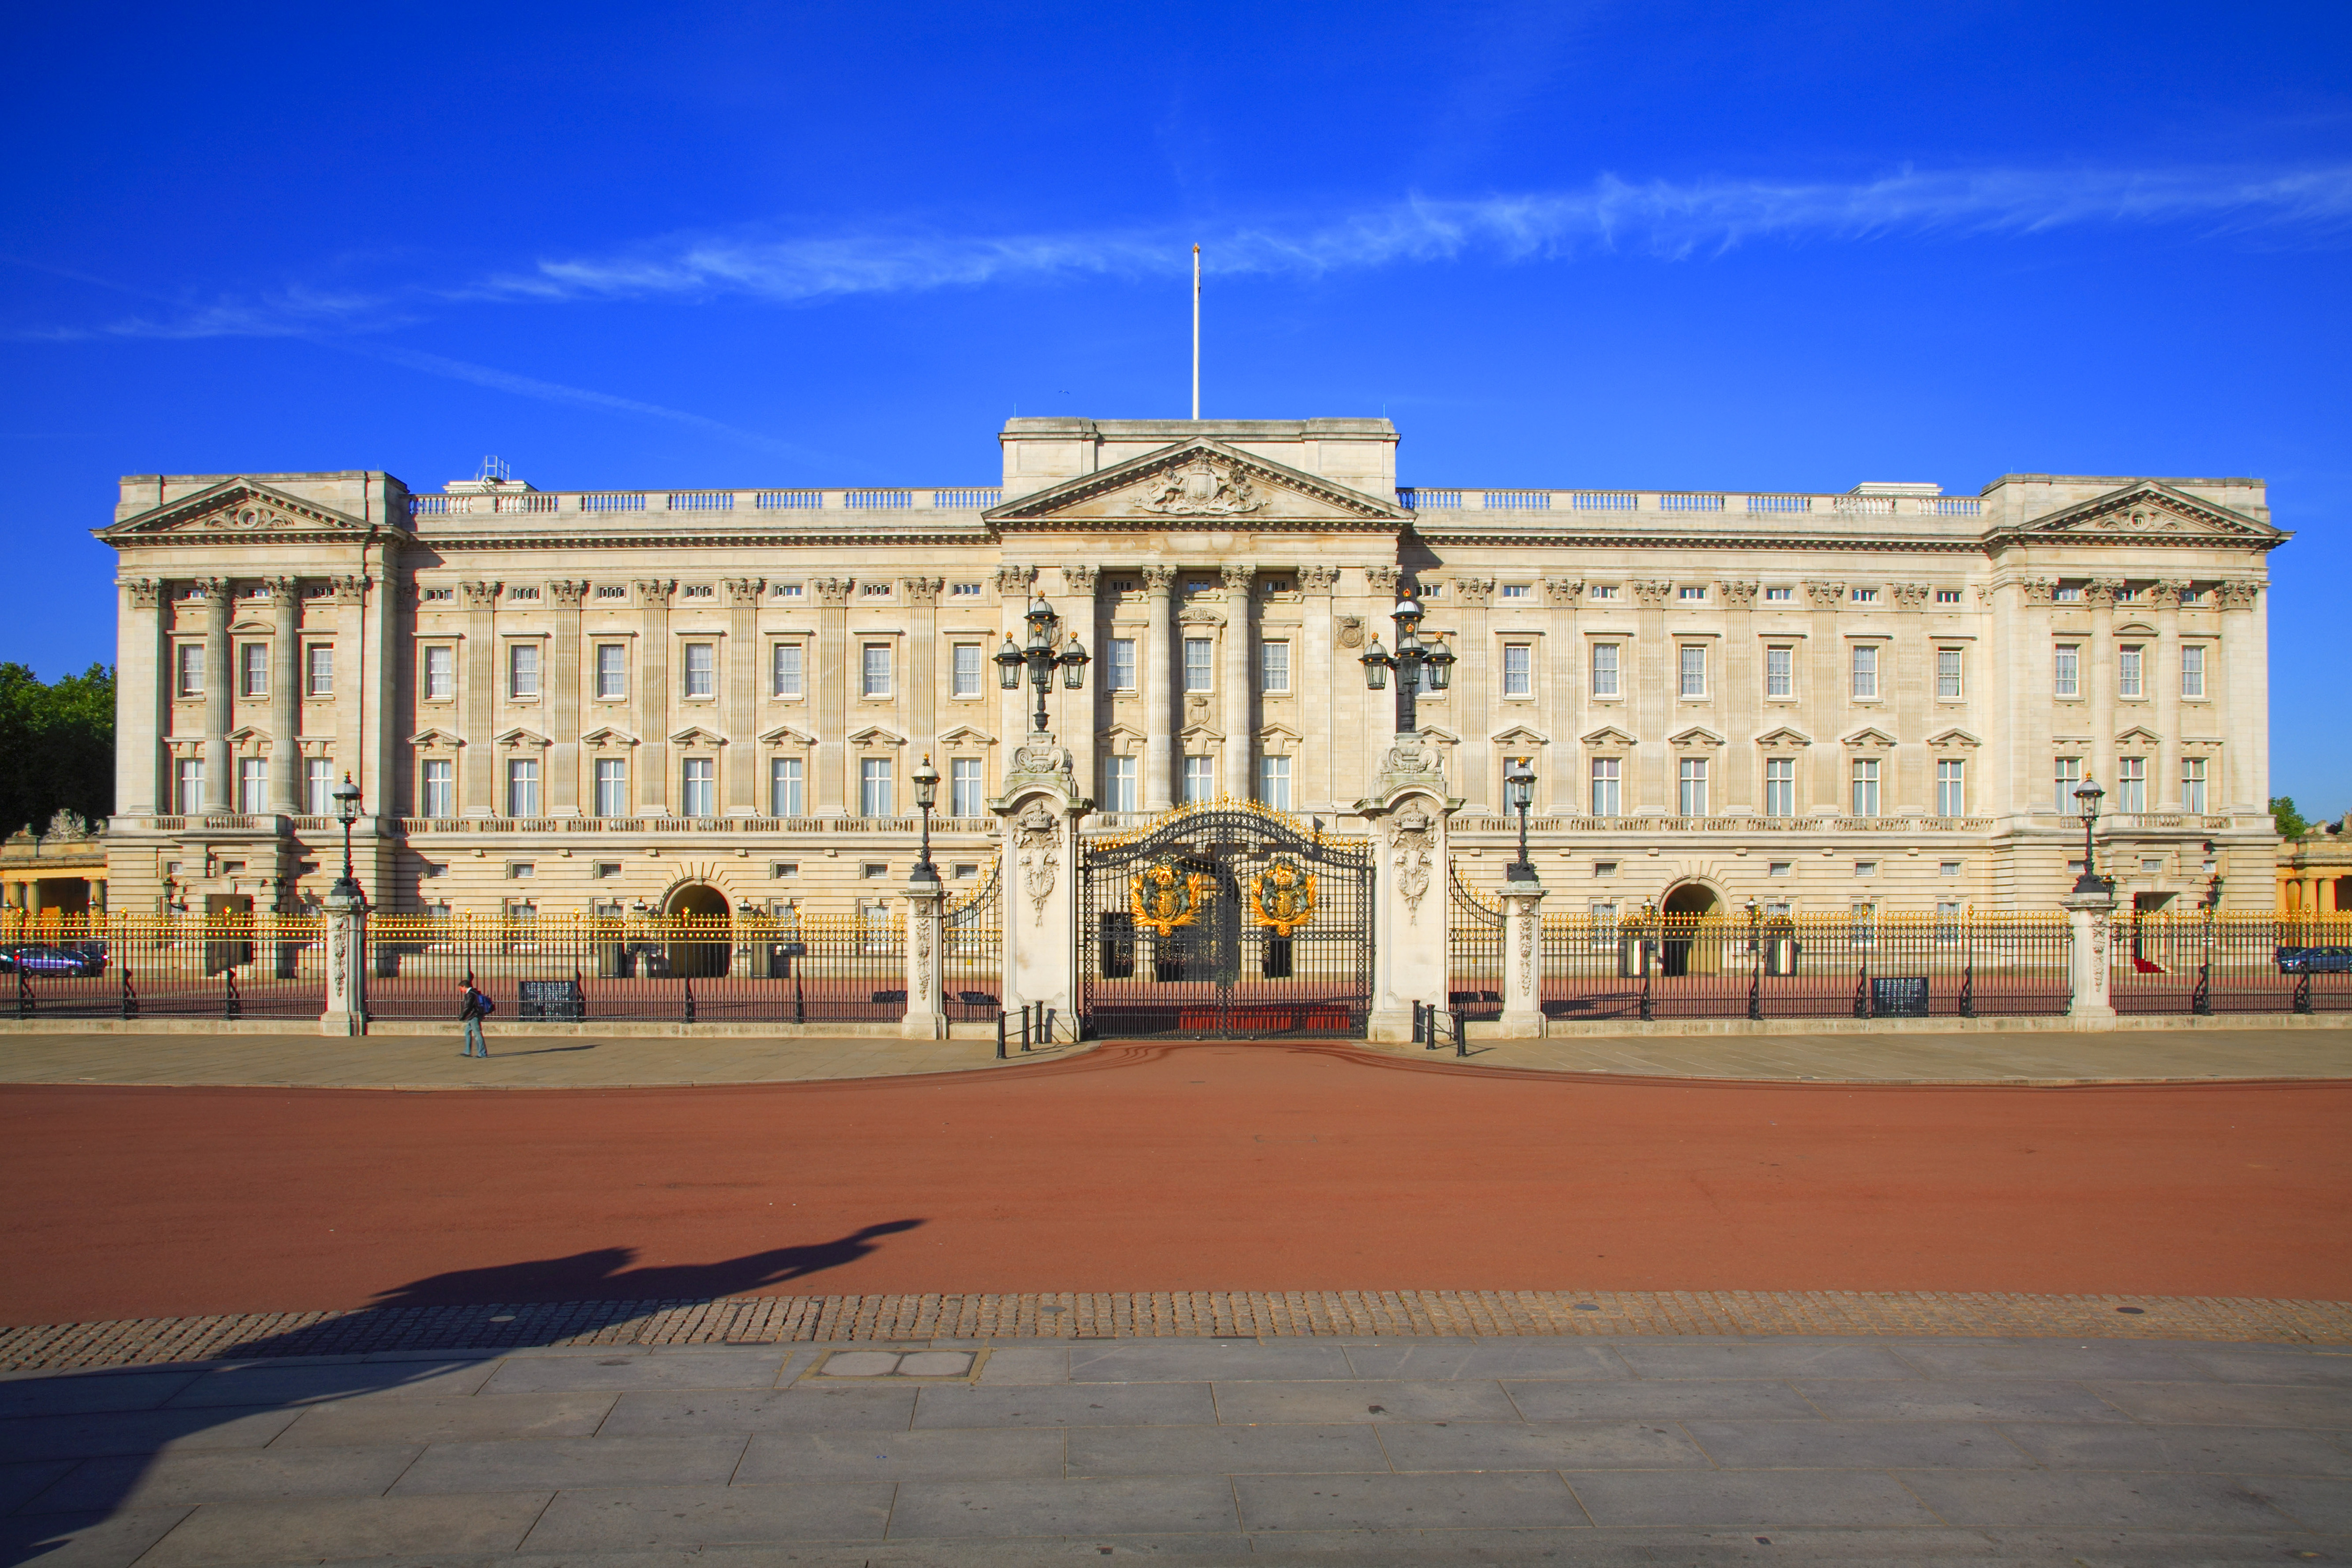 A front view of Buckingham Palace on July 17, 2006 | Source: Getty Images